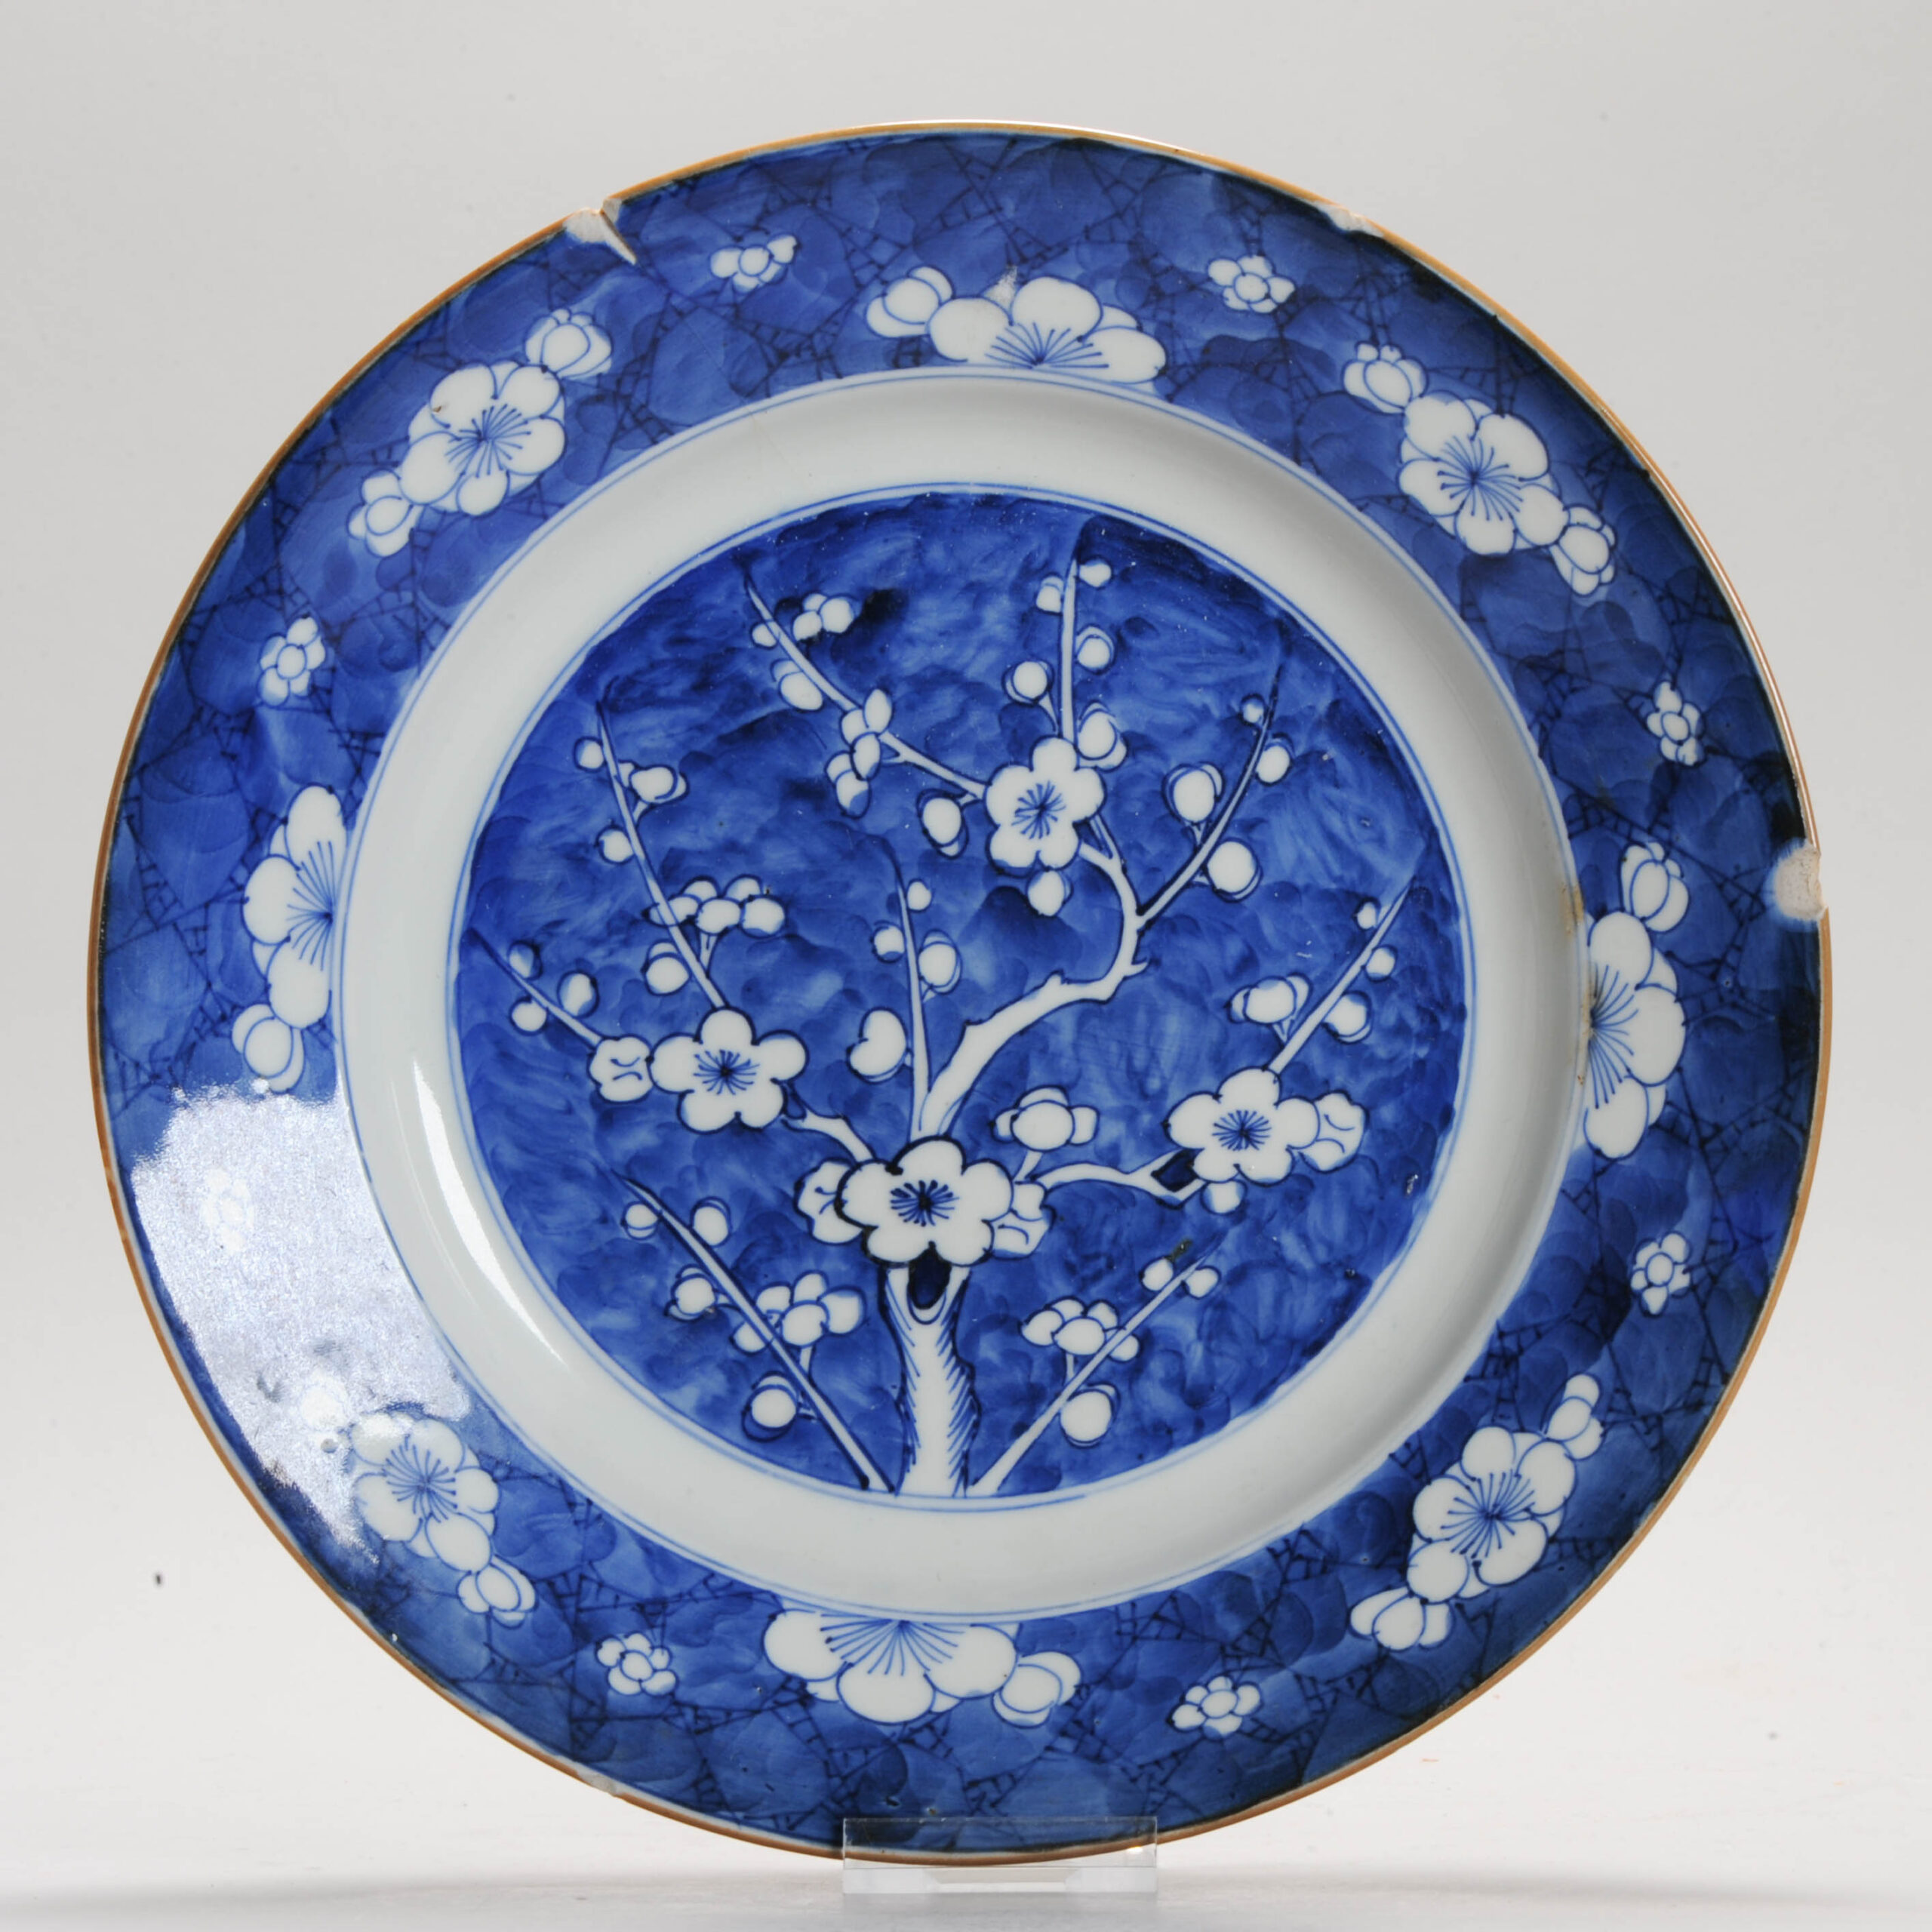 1167 Lovely cobalt blue plate with a Prunus on Crackles ice decoration. Qing period